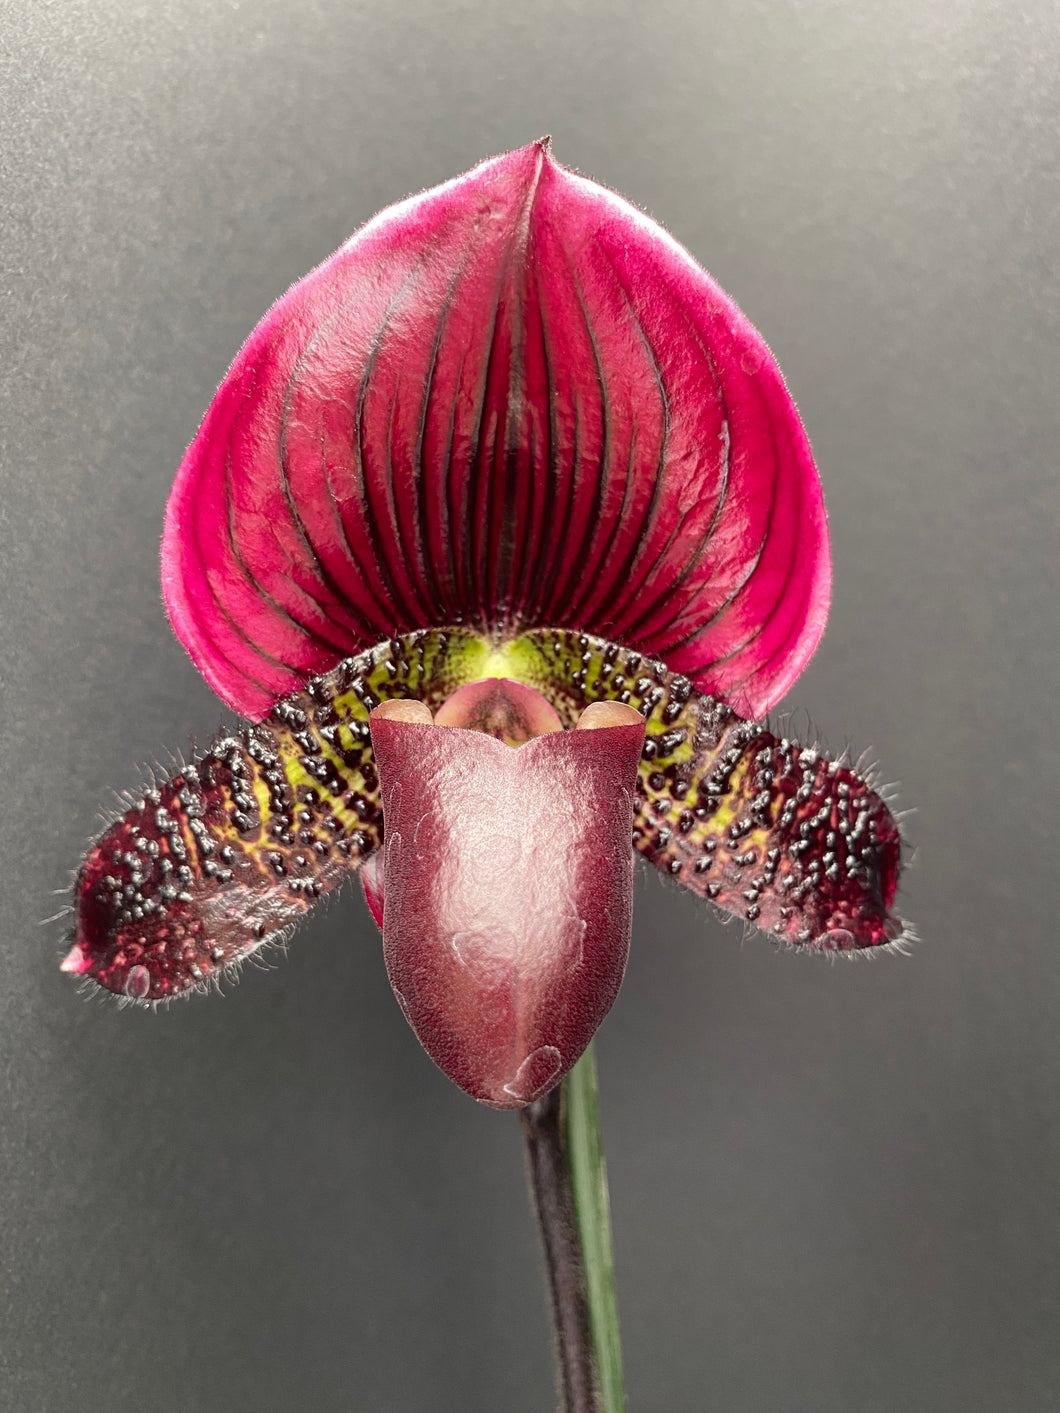 Paphiopedilum GRAND SANGIOVESE	(Hsinying Cyber Leopard x Hsinying Red Apple)